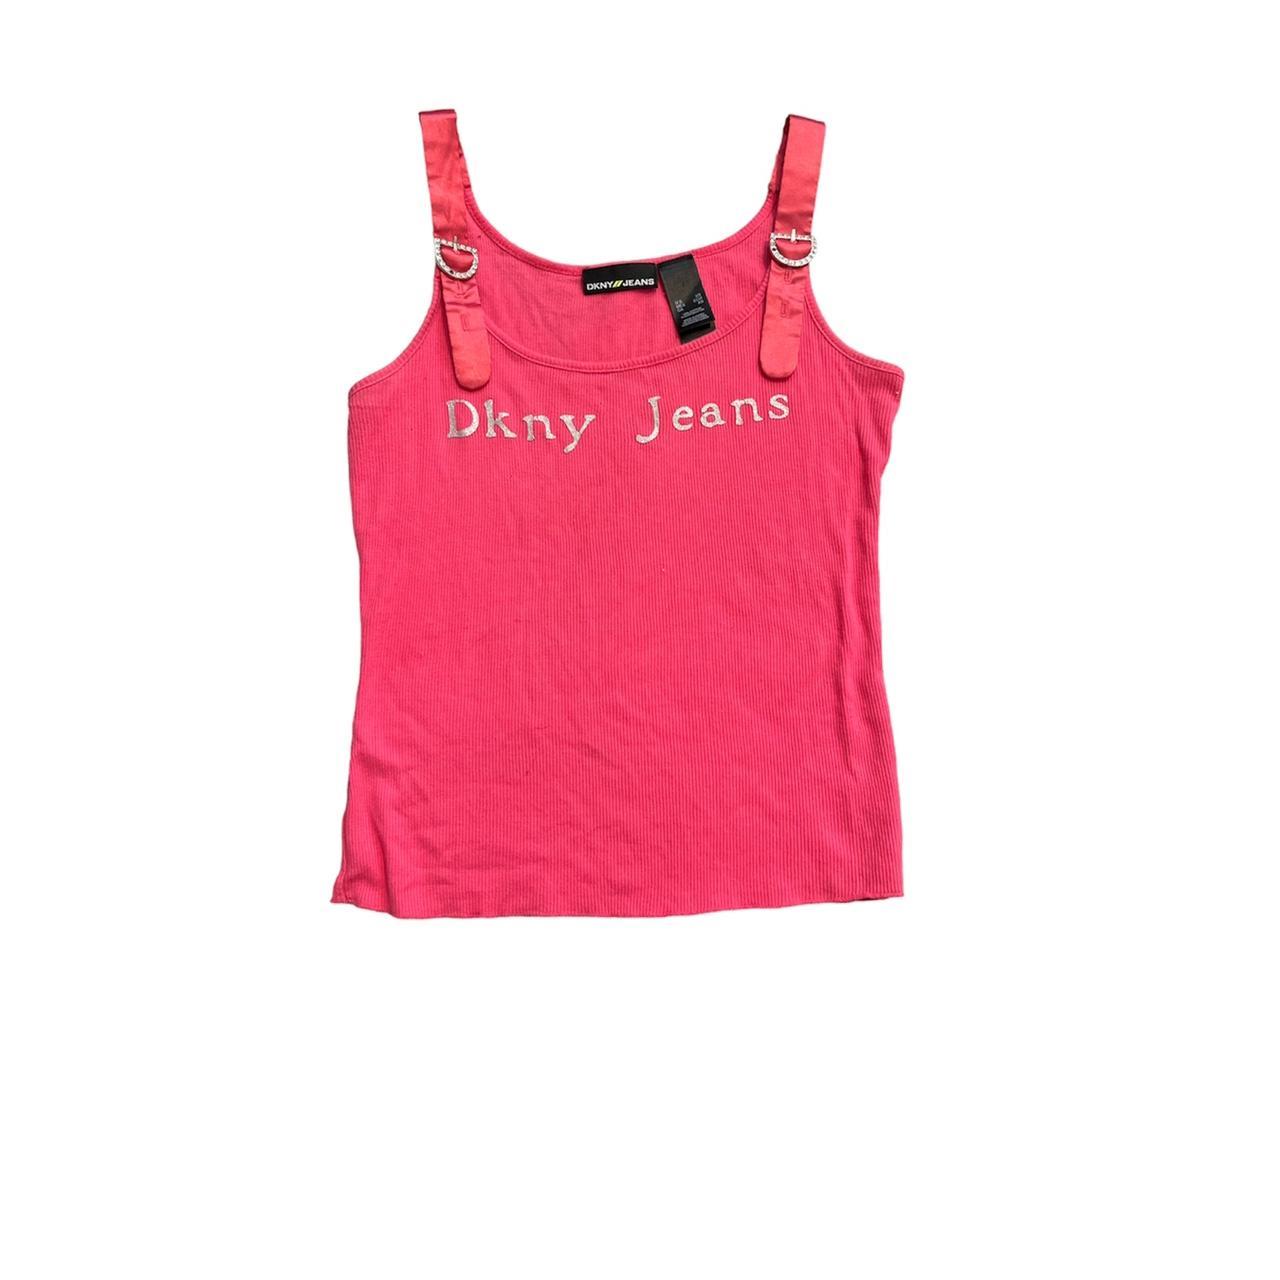 DKNY Women's Pink and Silver Vest